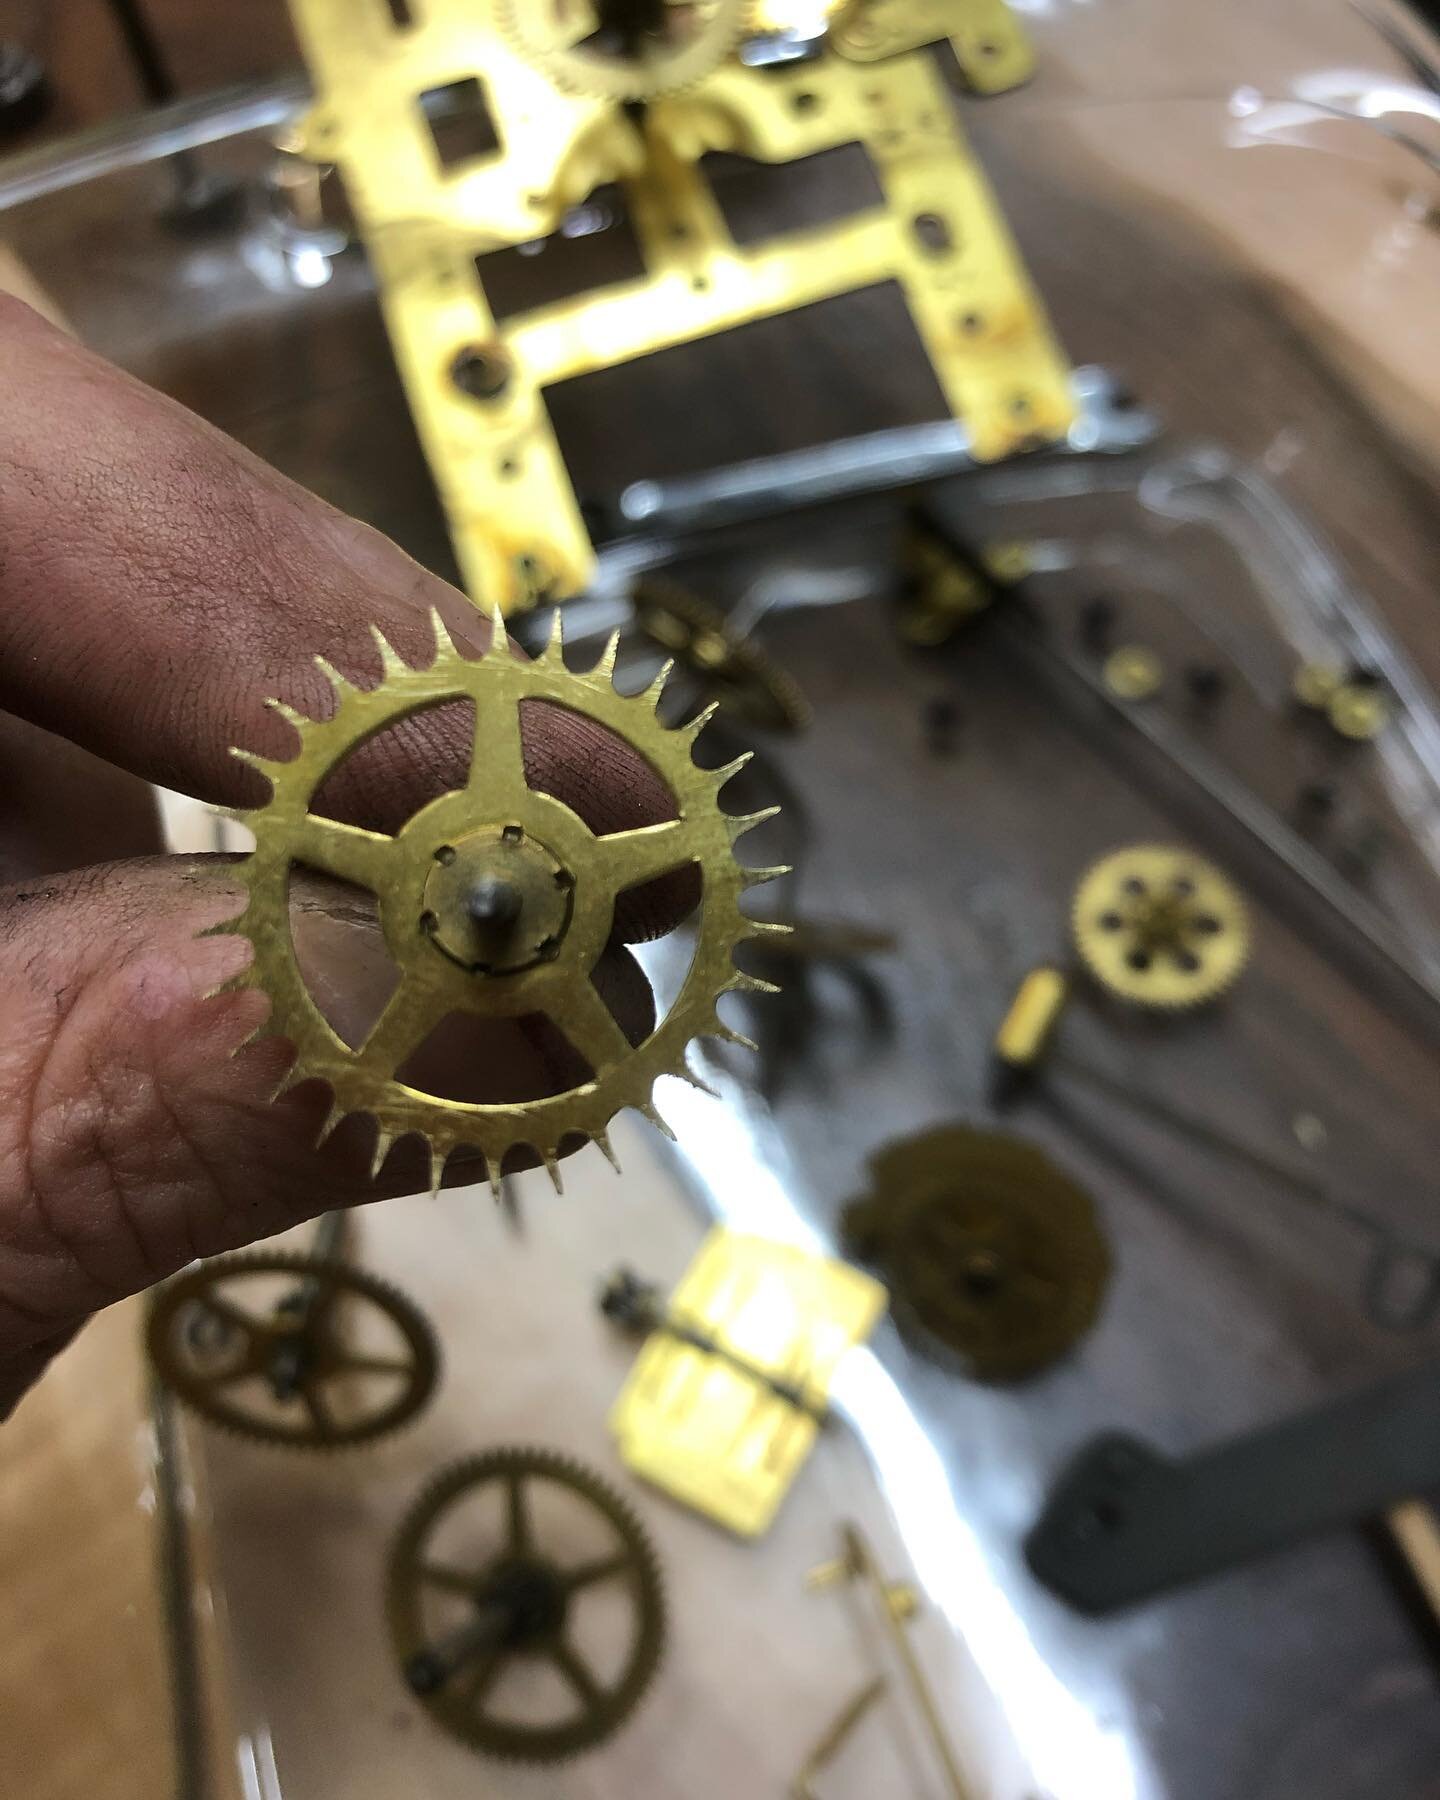 Figuring out the problem is generally more difficult that solving it. #problemsolved #seththomasclock #antiqeclock Okay, back to bicycle frames.